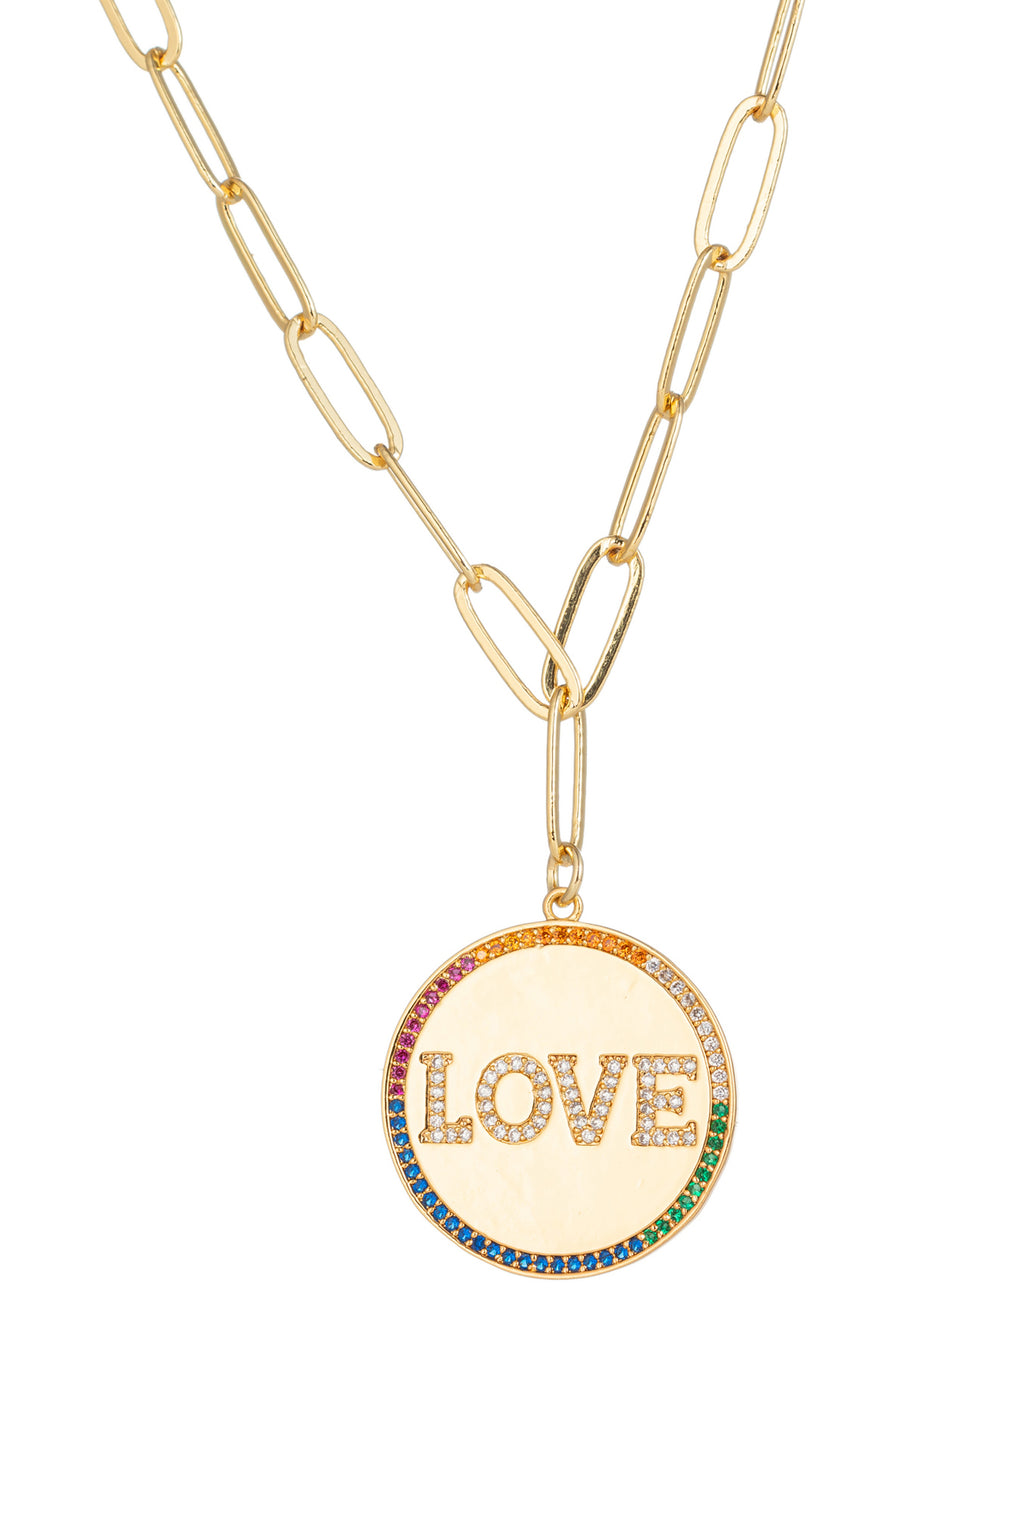 Rainbow LOVE lettering circle charm necklace with CZ crystals.